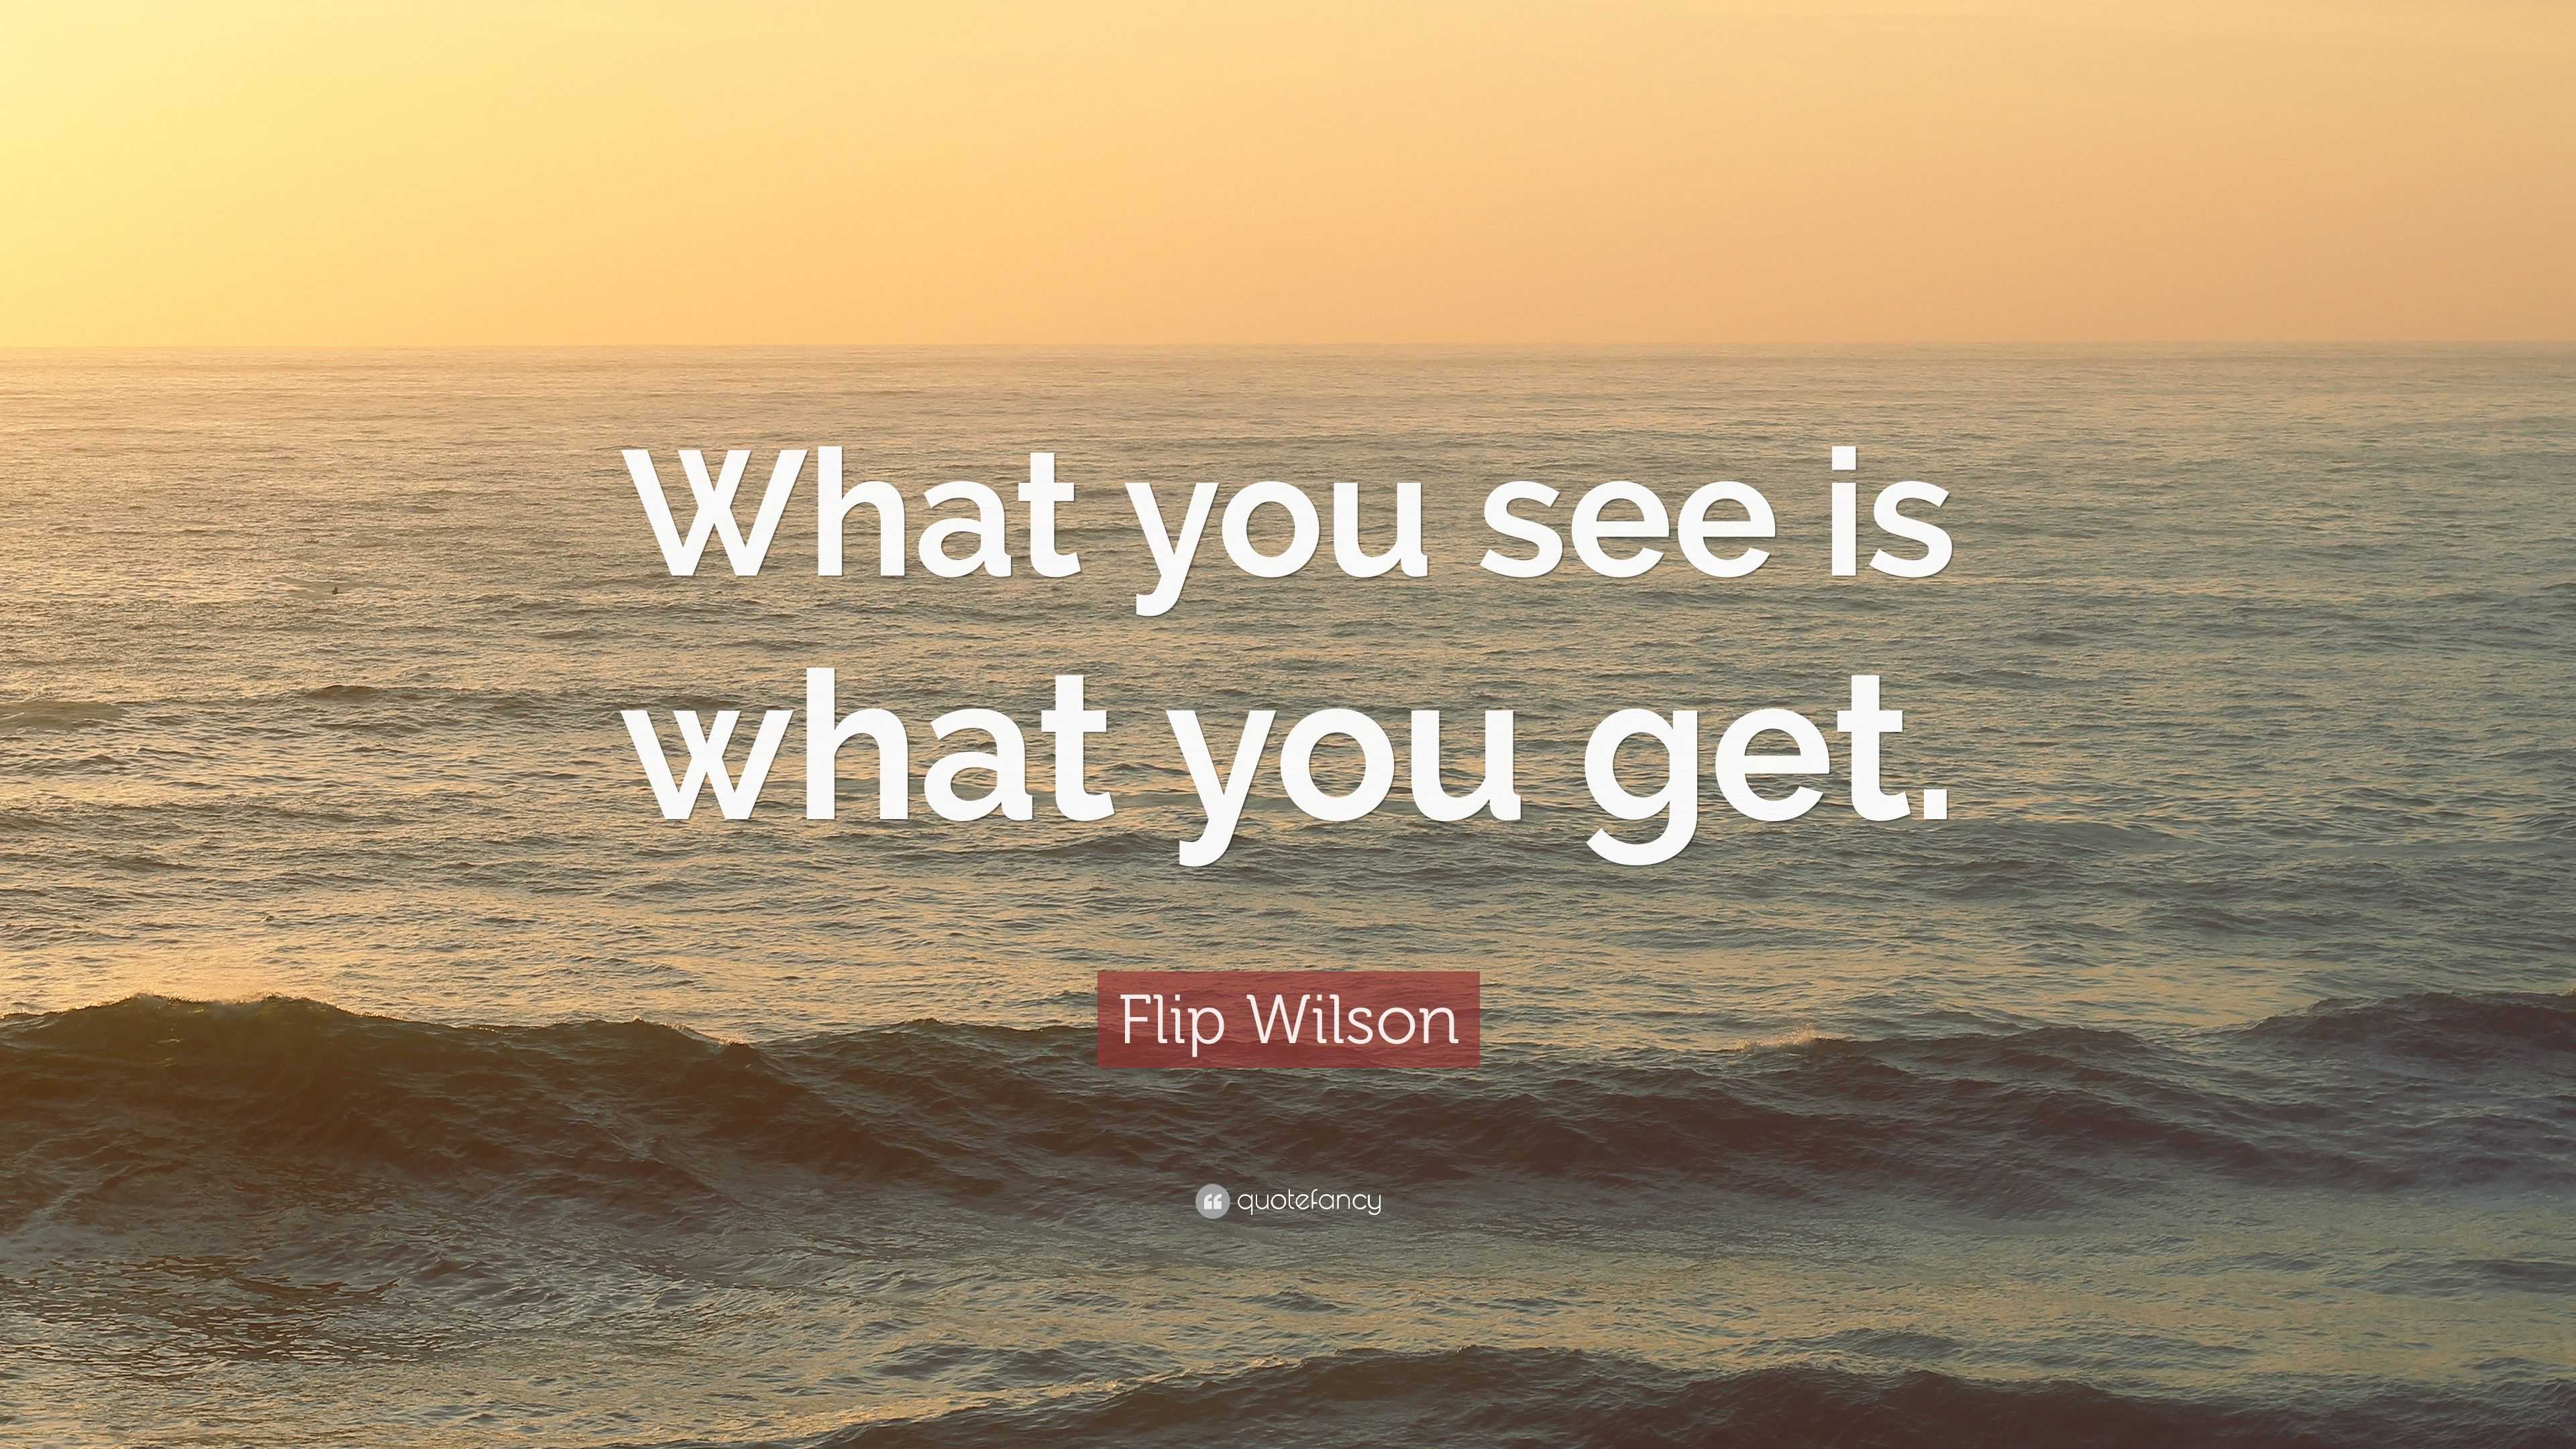 Flip Wilson Quote “what You See Is What You Get” 2609